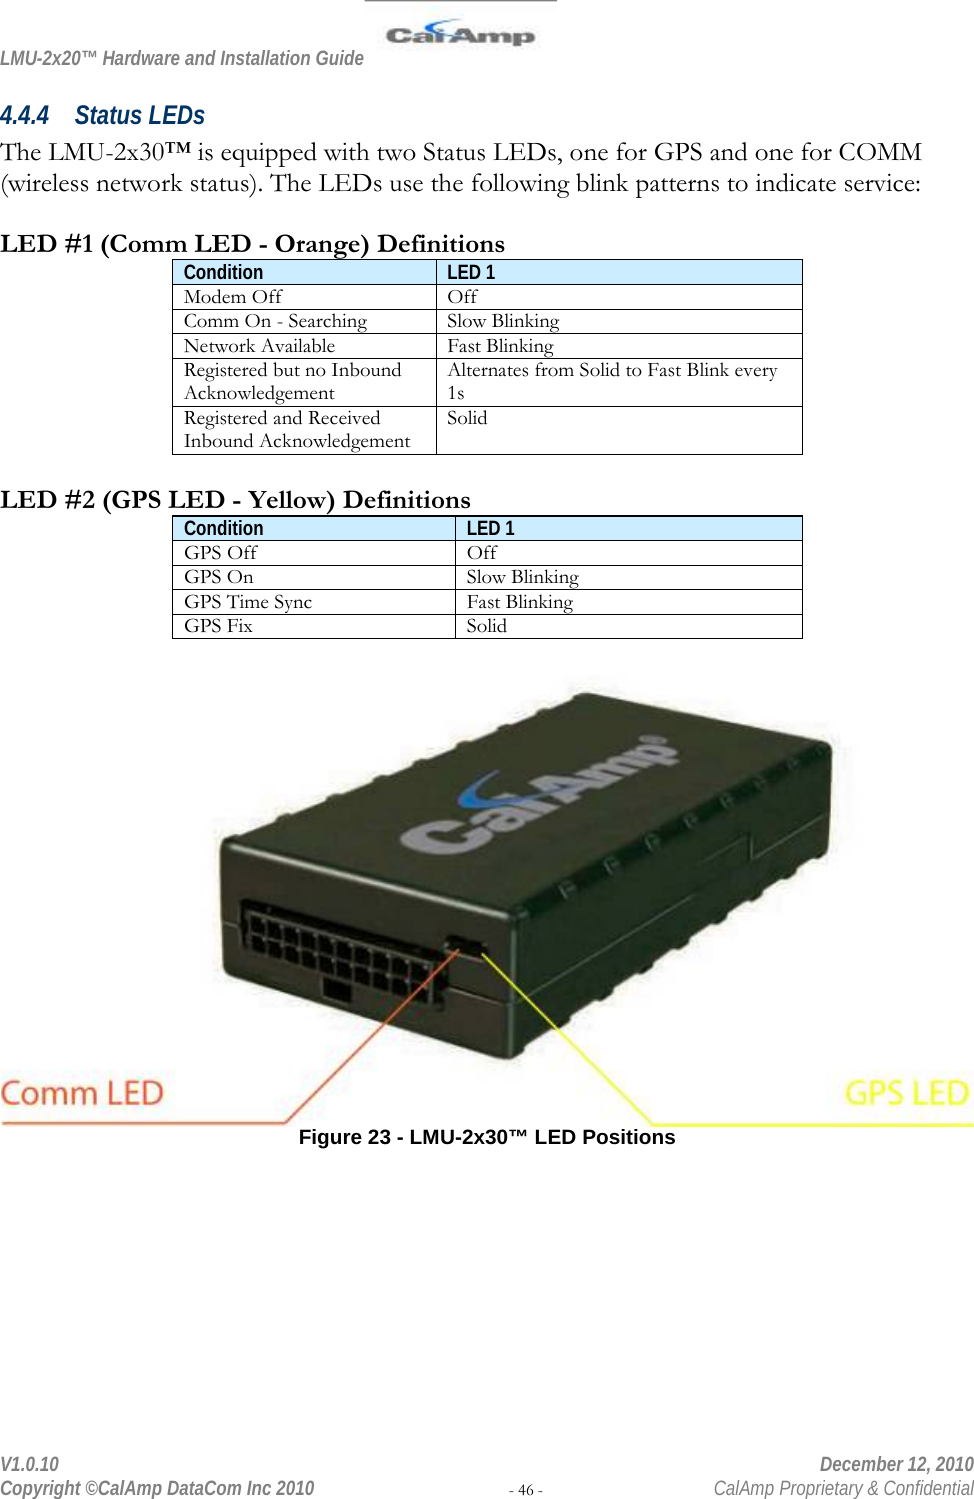 LMU-2x20™ Hardware and Installation Guide  V1.0.10    December 12, 2010 Copyright ©CalAmp DataCom Inc 2010 - 46 -  CalAmp Proprietary &amp; Confidential 4.4.4 Status LEDs The LMU-2x30™ is equipped with two Status LEDs, one for GPS and one for COMM (wireless network status). The LEDs use the following blink patterns to indicate service:  LED #1 (Comm LED - Orange) Definitions Condition LED 1 Modem Off Off Comm On - Searching Slow Blinking Network Available Fast Blinking Registered but no Inbound Acknowledgement Alternates from Solid to Fast Blink every 1s Registered and Received Inbound Acknowledgement Solid  LED #2 (GPS LED - Yellow) Definitions Condition LED 1 GPS Off Off GPS On Slow Blinking GPS Time Sync Fast Blinking GPS Fix Solid   Figure 23 - LMU-2x30™ LED Positions  